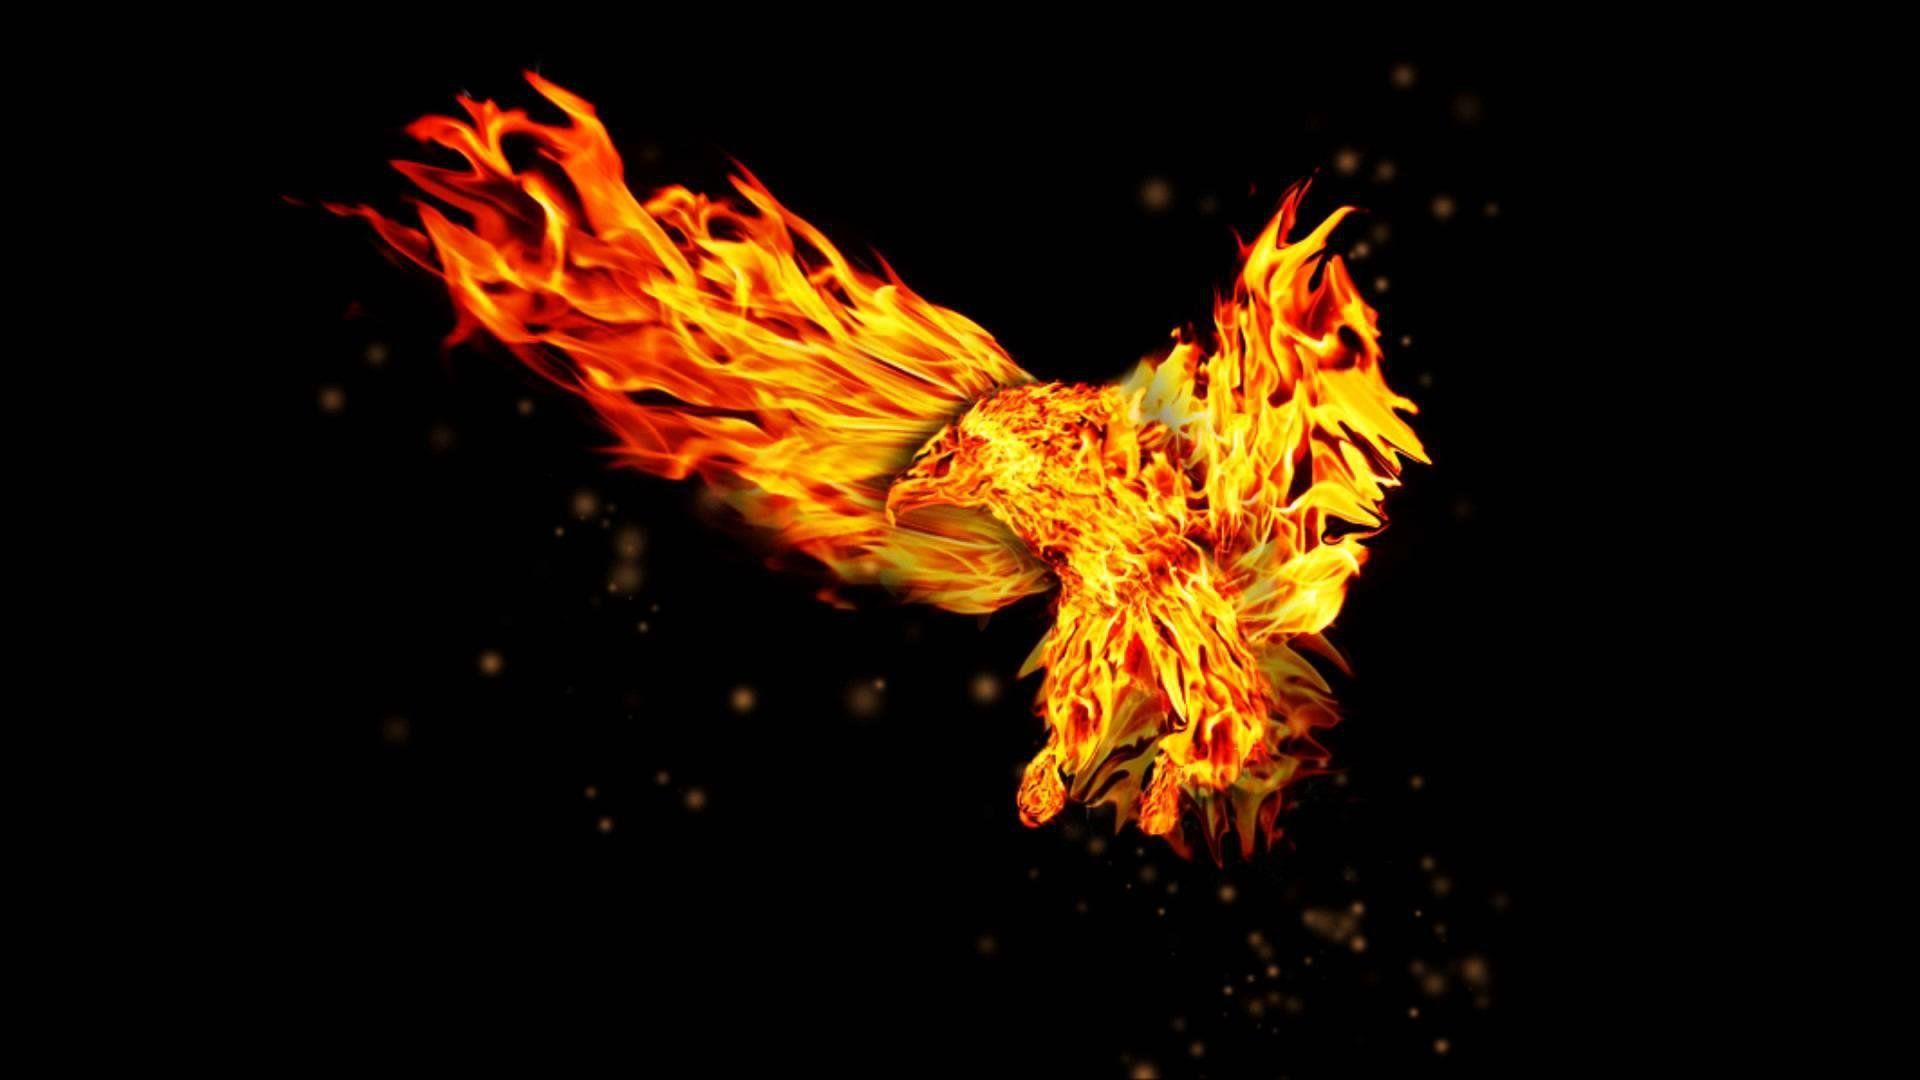 Abstract fire Logo Design Free Download Vector File